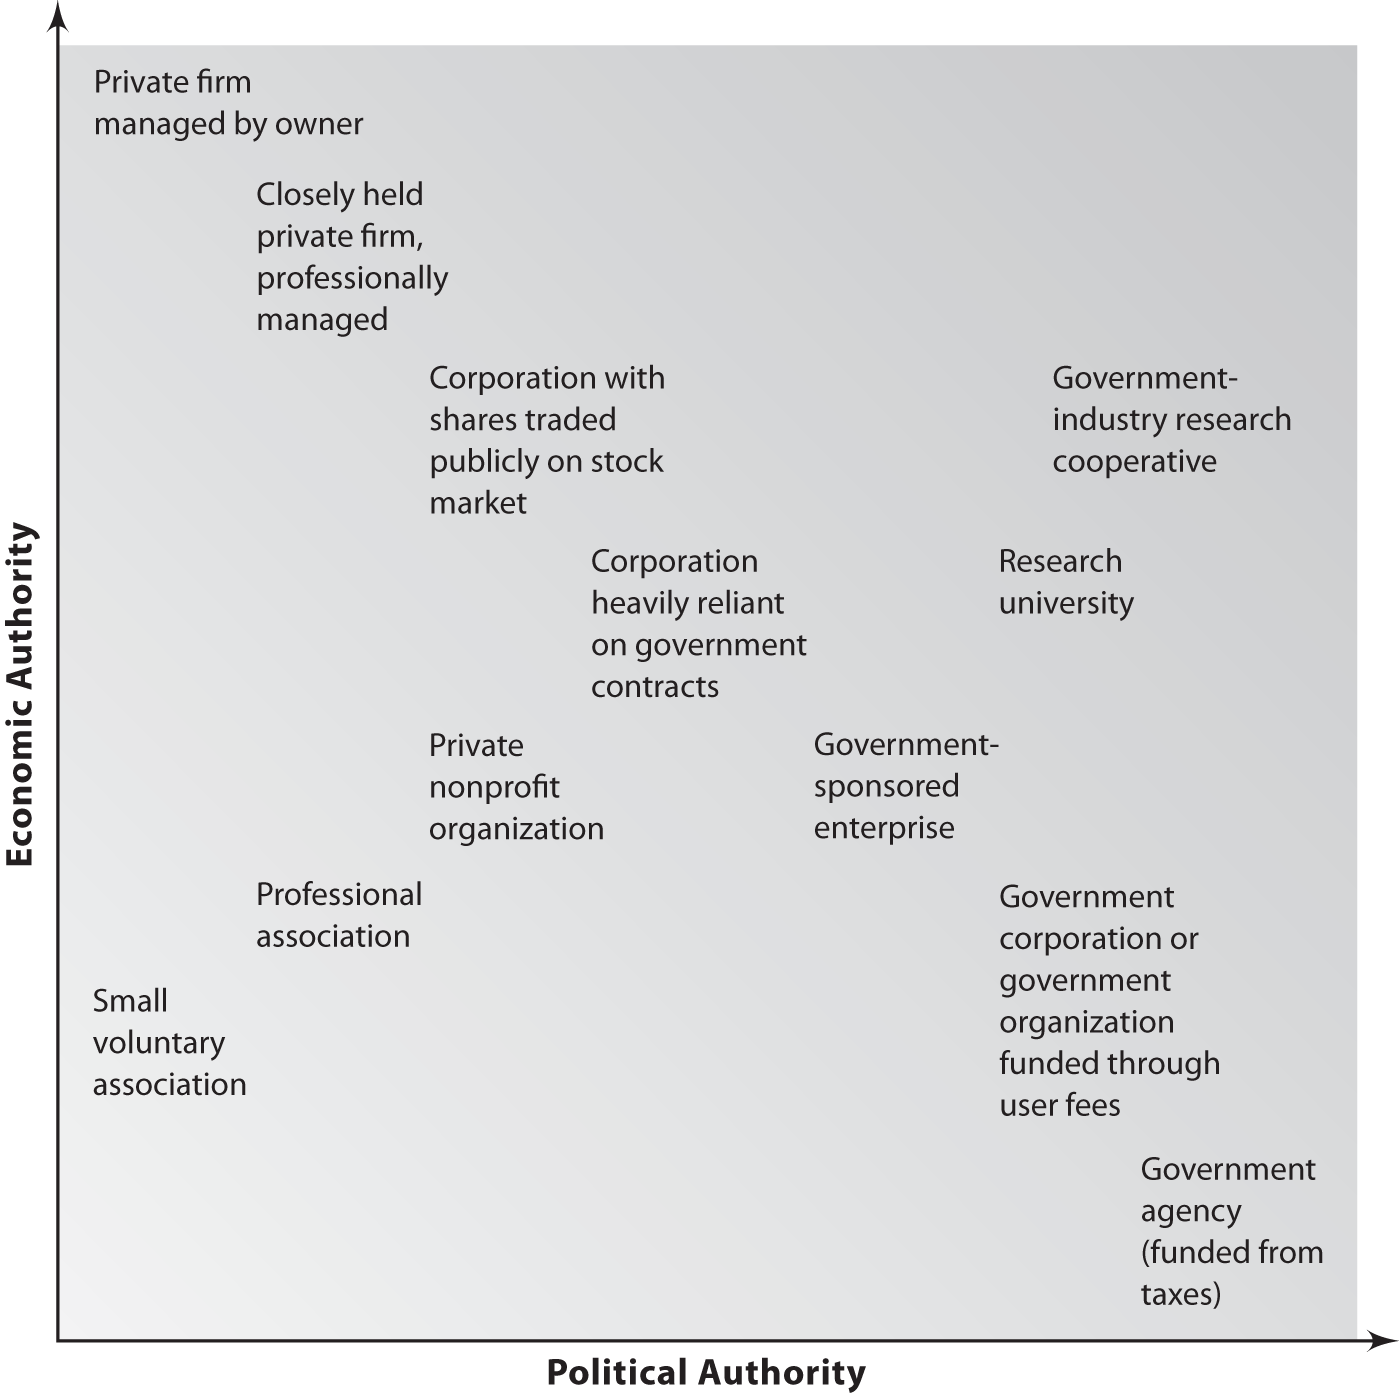 Schematic illustration of the publicness of an organization depends on the combination of two dimensions such as political and economic authority.